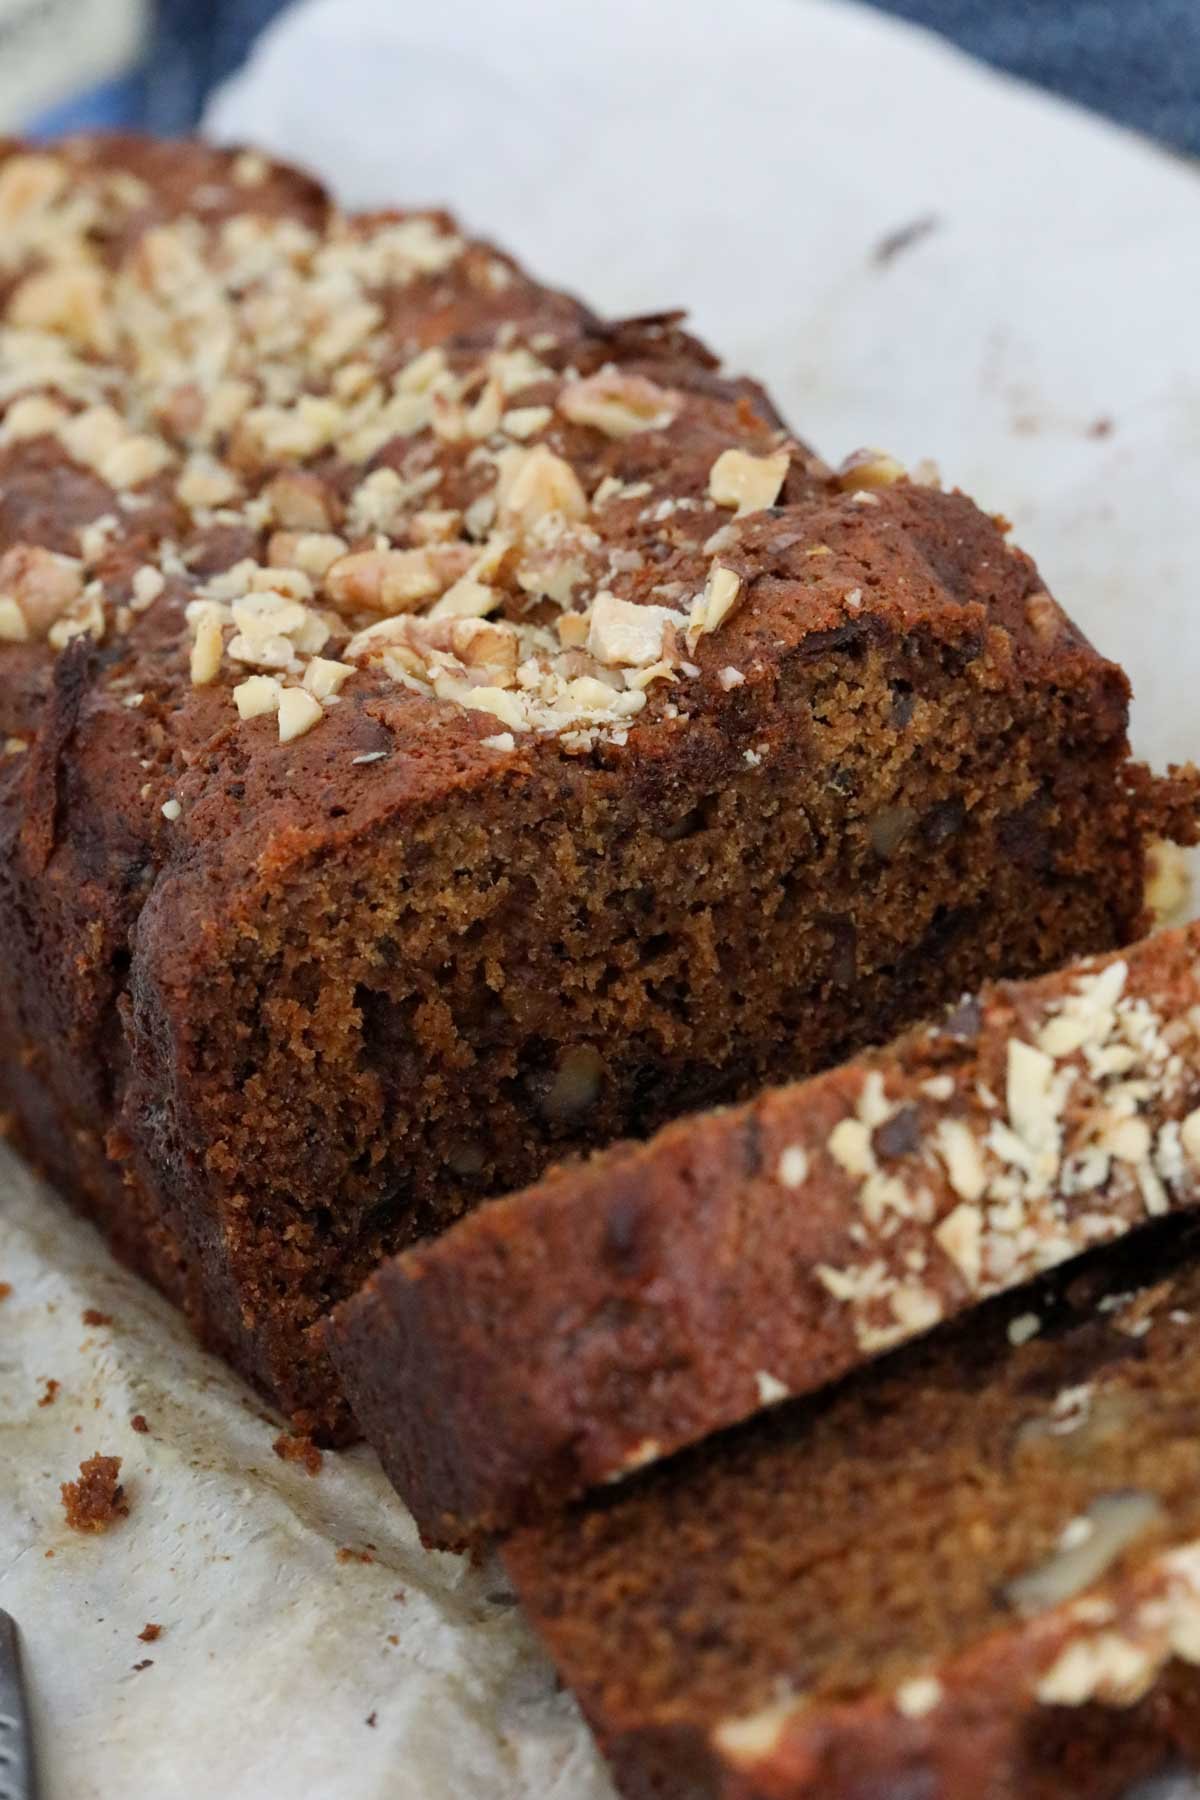 A close up of a loaf sprinkled with chopped walnuts, with a slice cut.